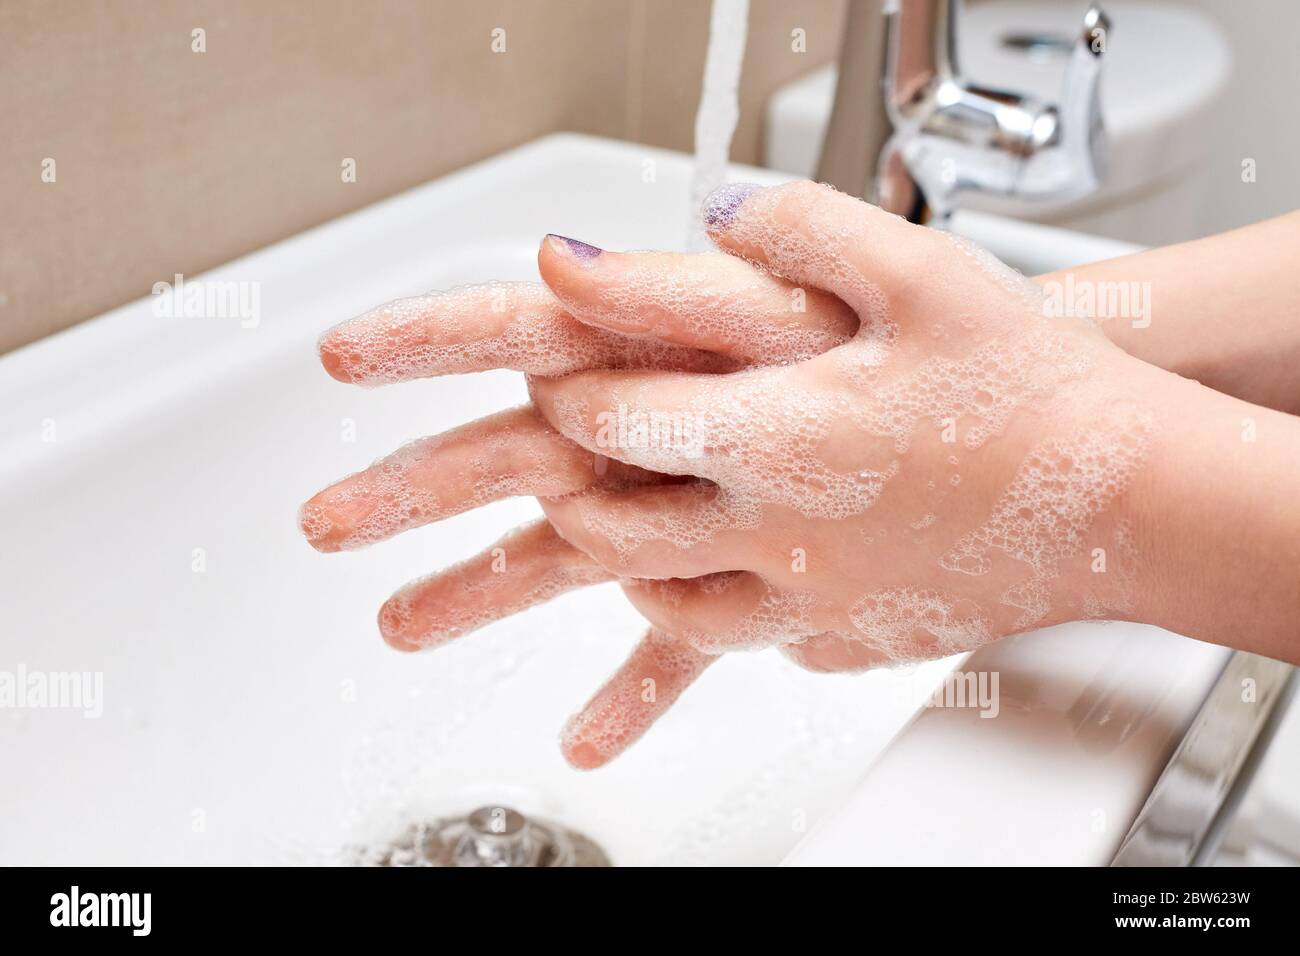 White Child Washing Hands with Soap and Running Water over Sink, Fingers Extended Stock Photo